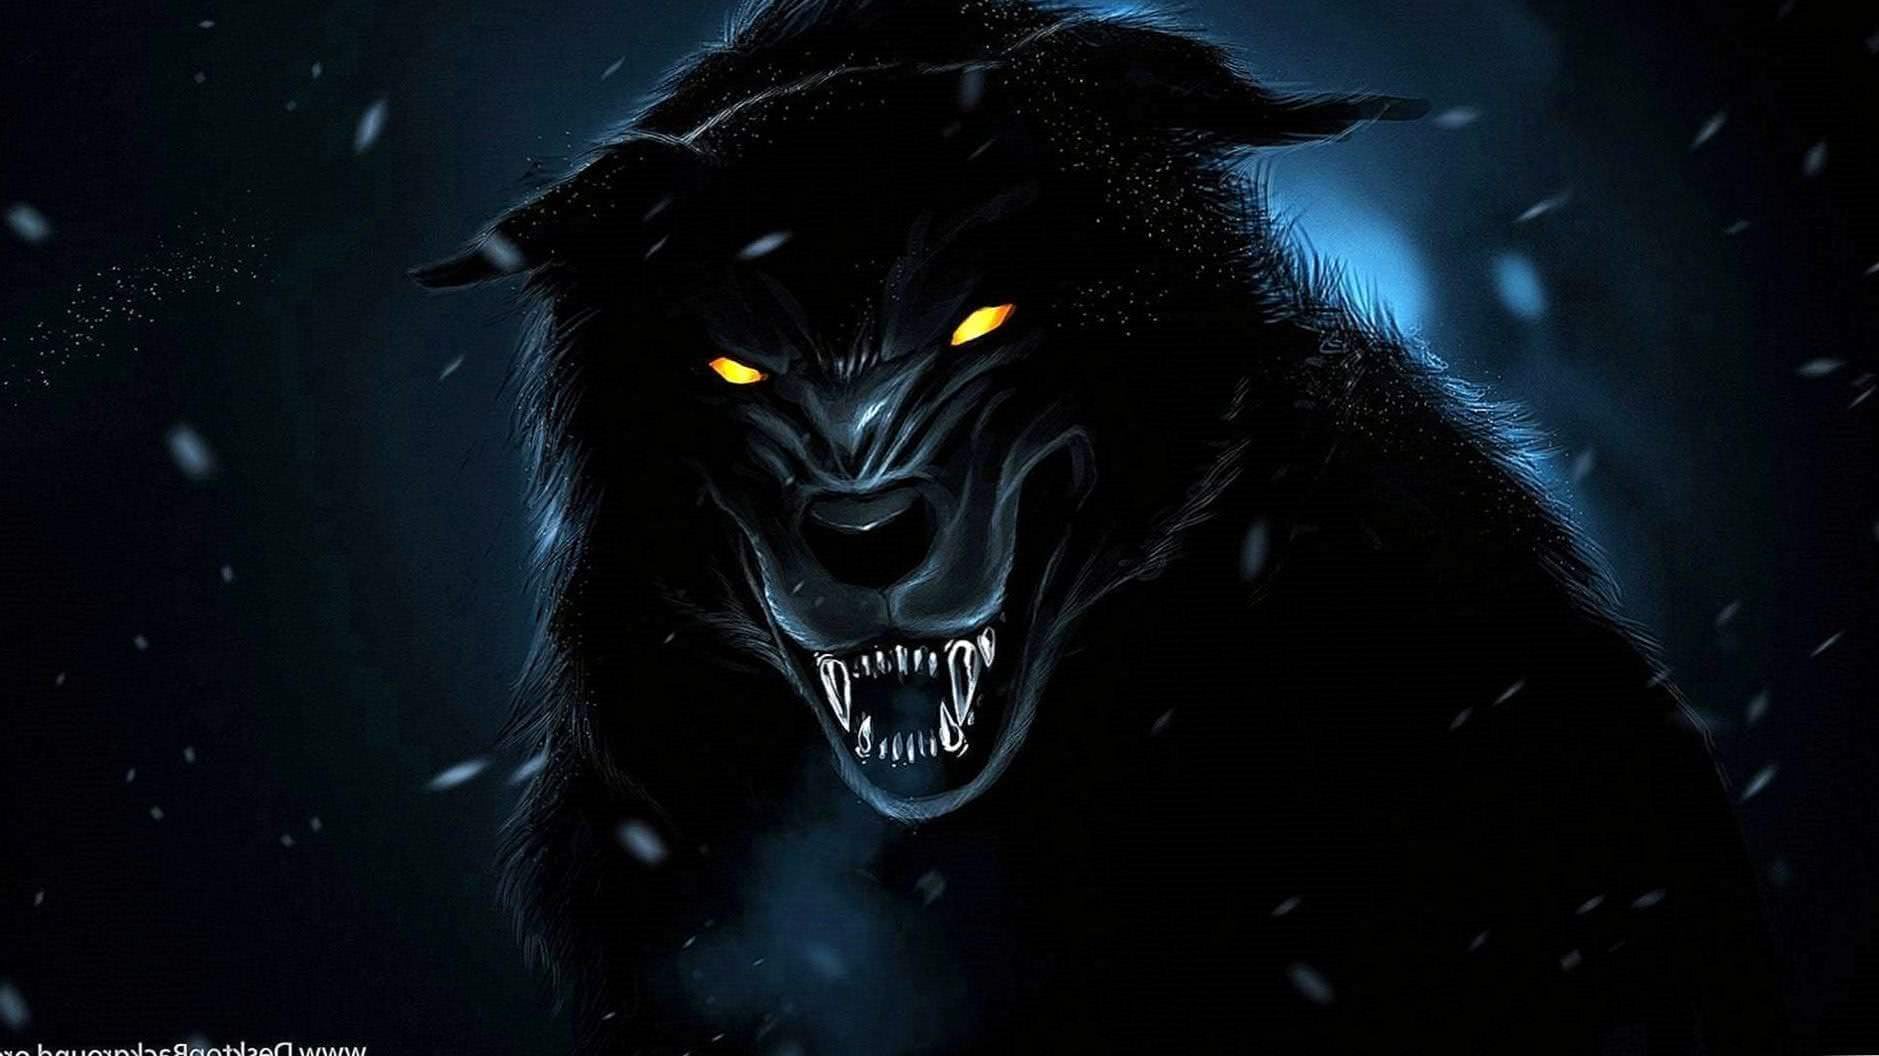 HD Wallpapers Of Black Wolf